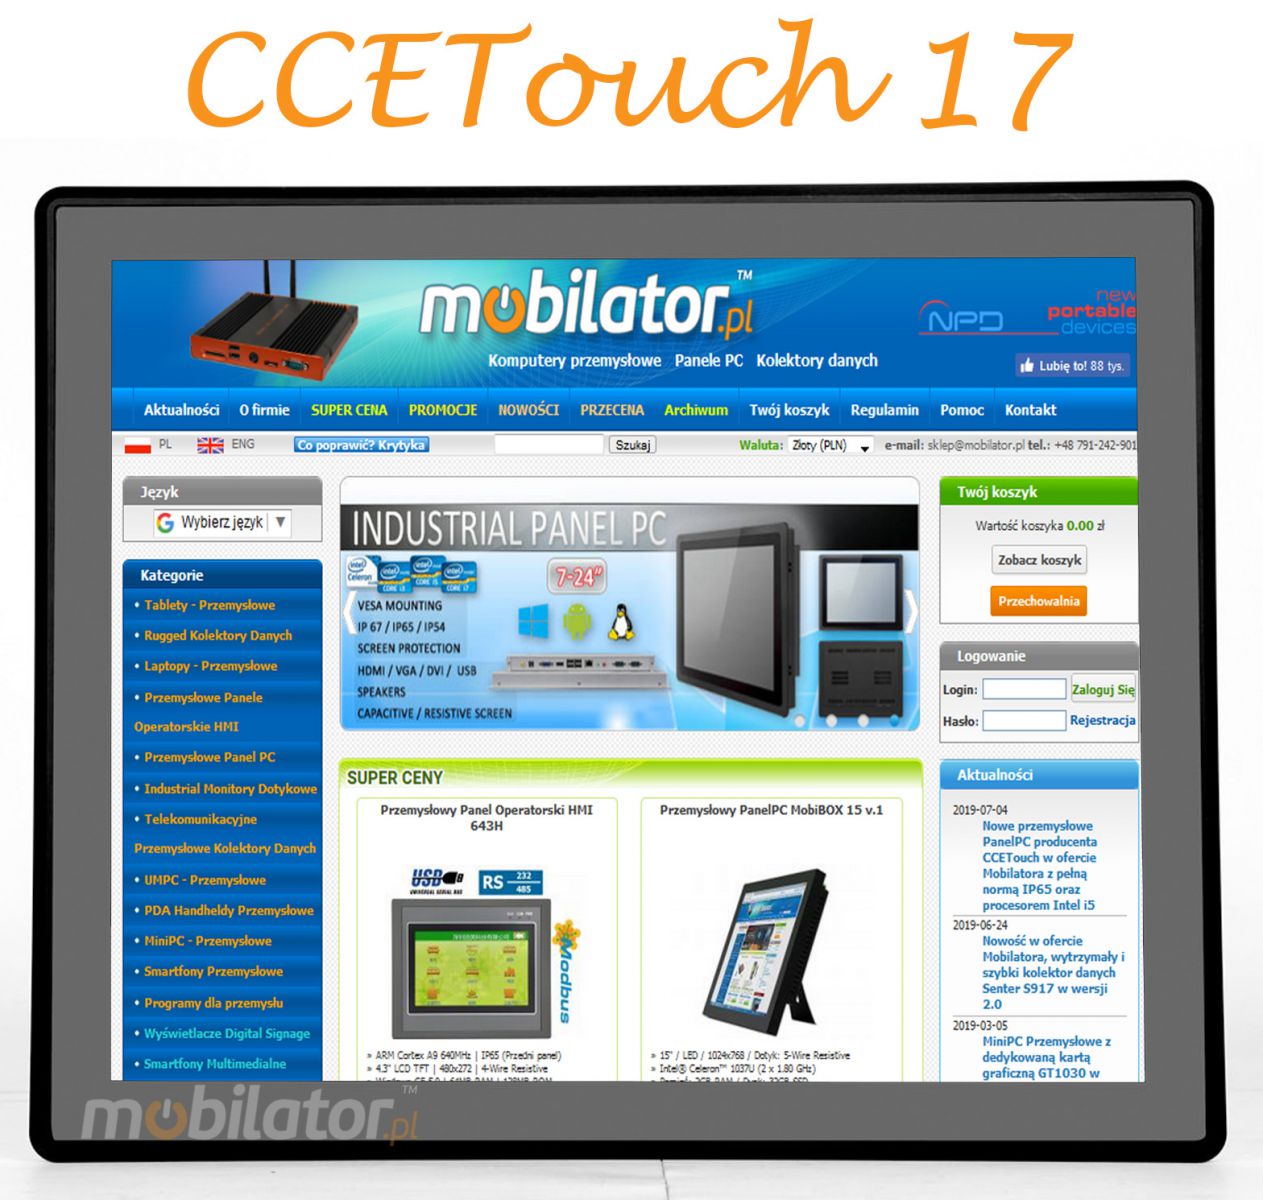 CCE Touch Mobilator CTPC170RD3 Flat Design PCAP Fanless Touch PC, LED panel, 10 points touch screen, built-in WIFI, 12V DC input